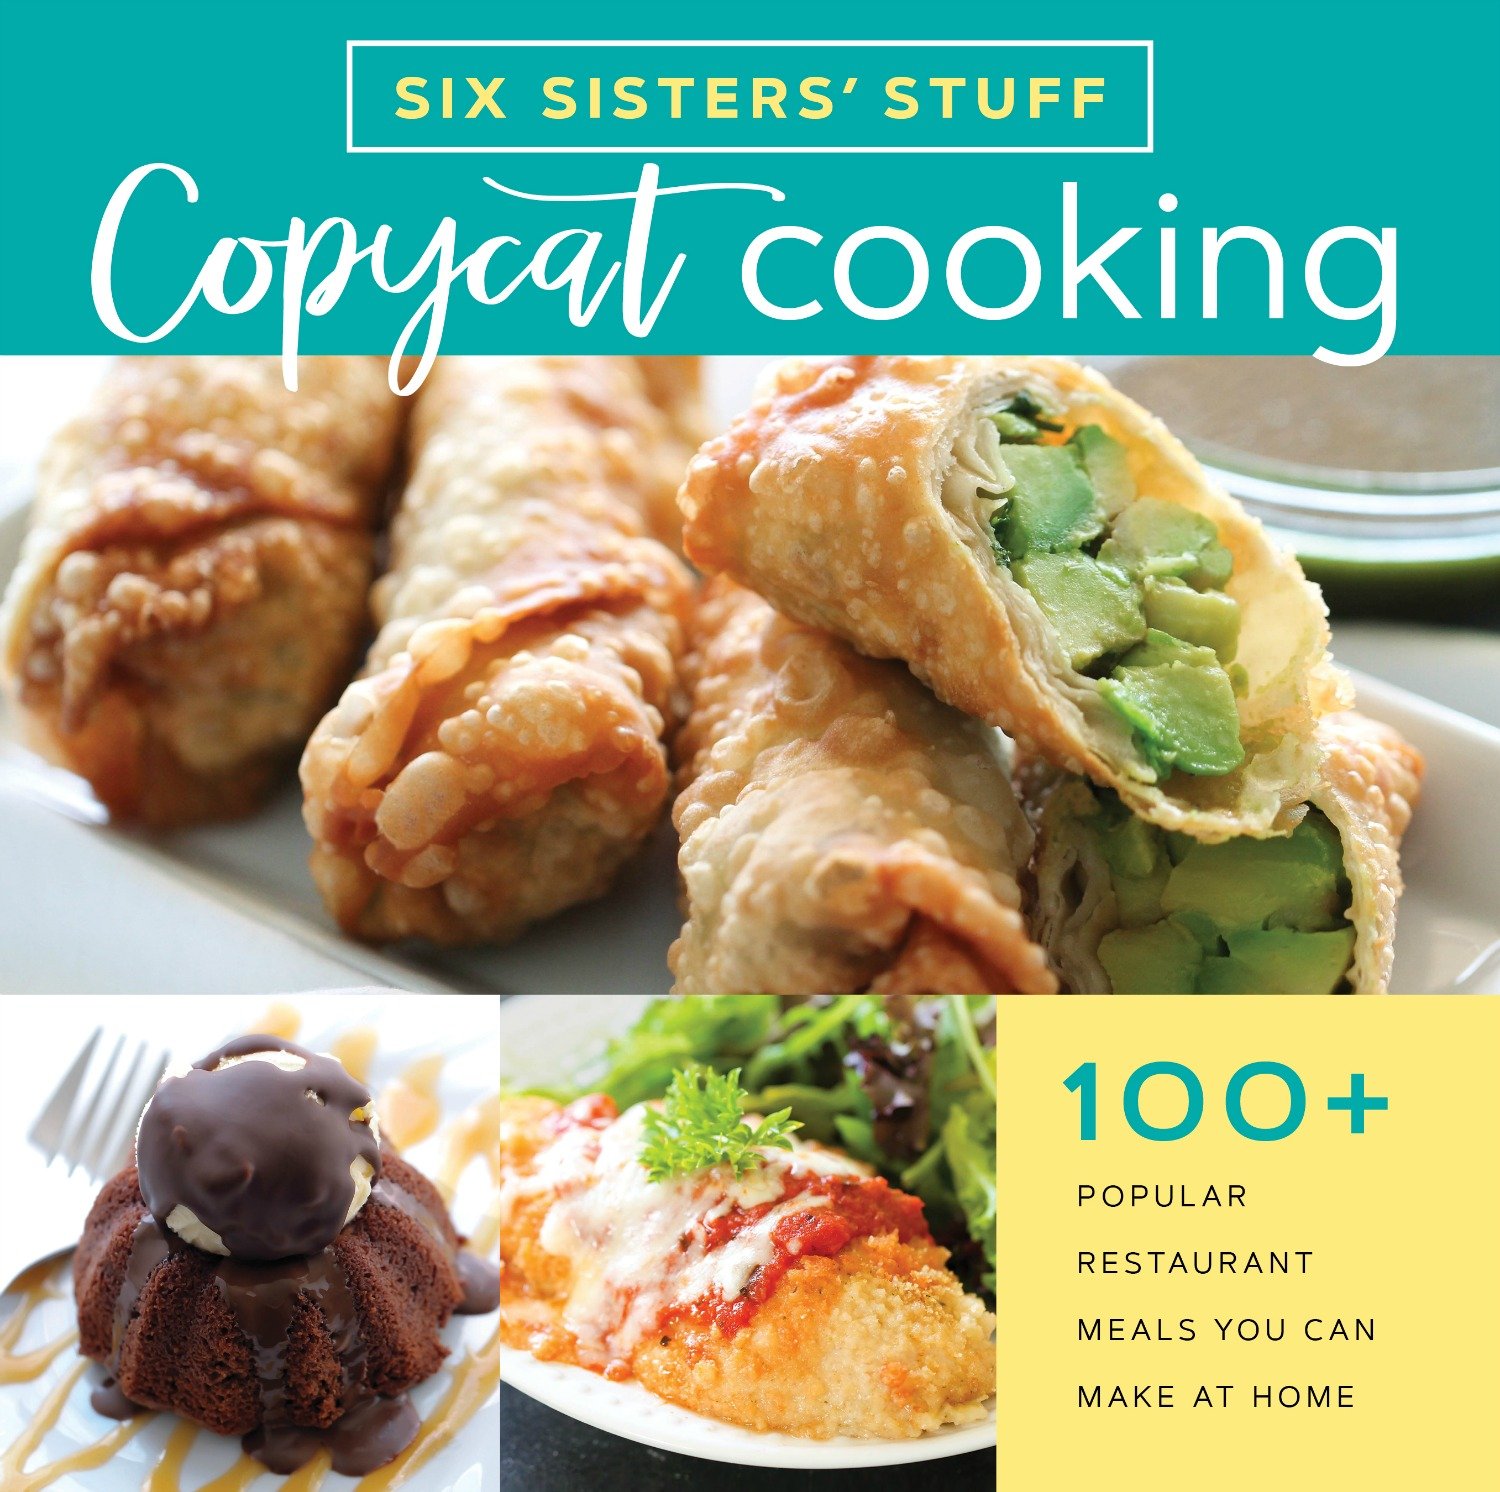 Copycat Cooking Cook Book from Six Sisters Stuff